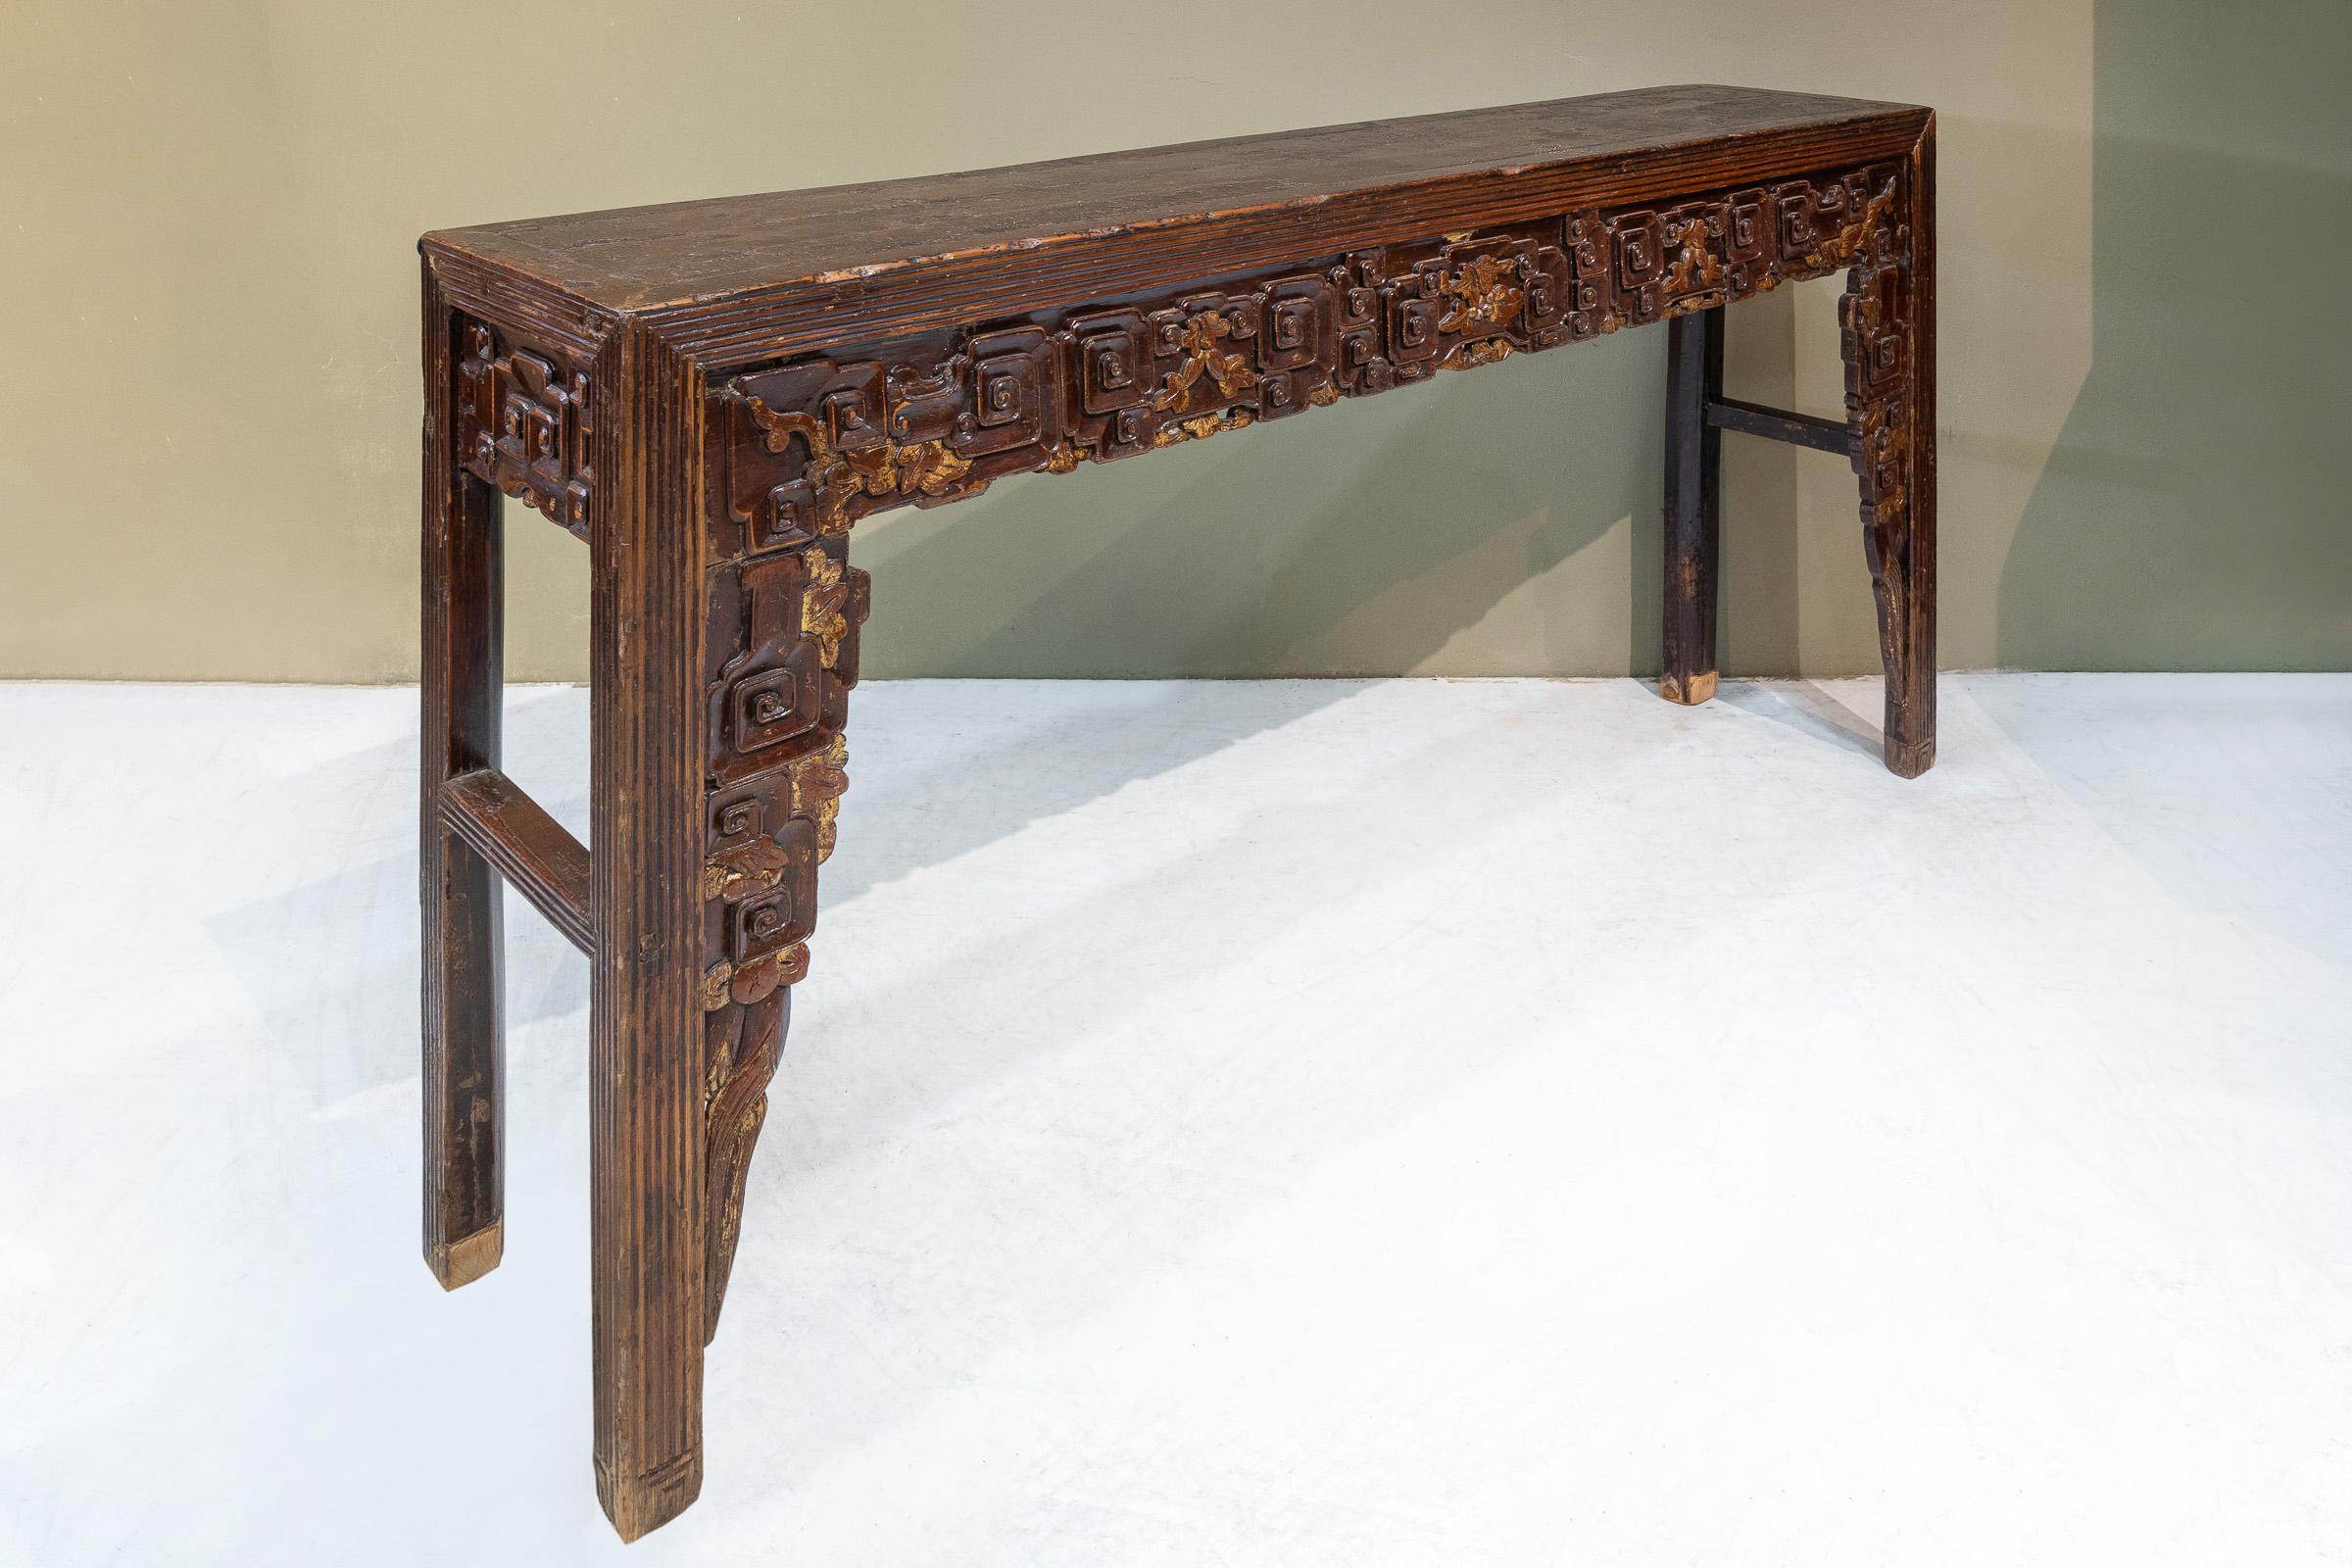 A slim altar table from Chaozhou province, China. This has a very attractive patina, and on the table top you can see the layers of the old lacquer, including a layer of gauze. The relief carvings on the table have a cloud design throughout, it